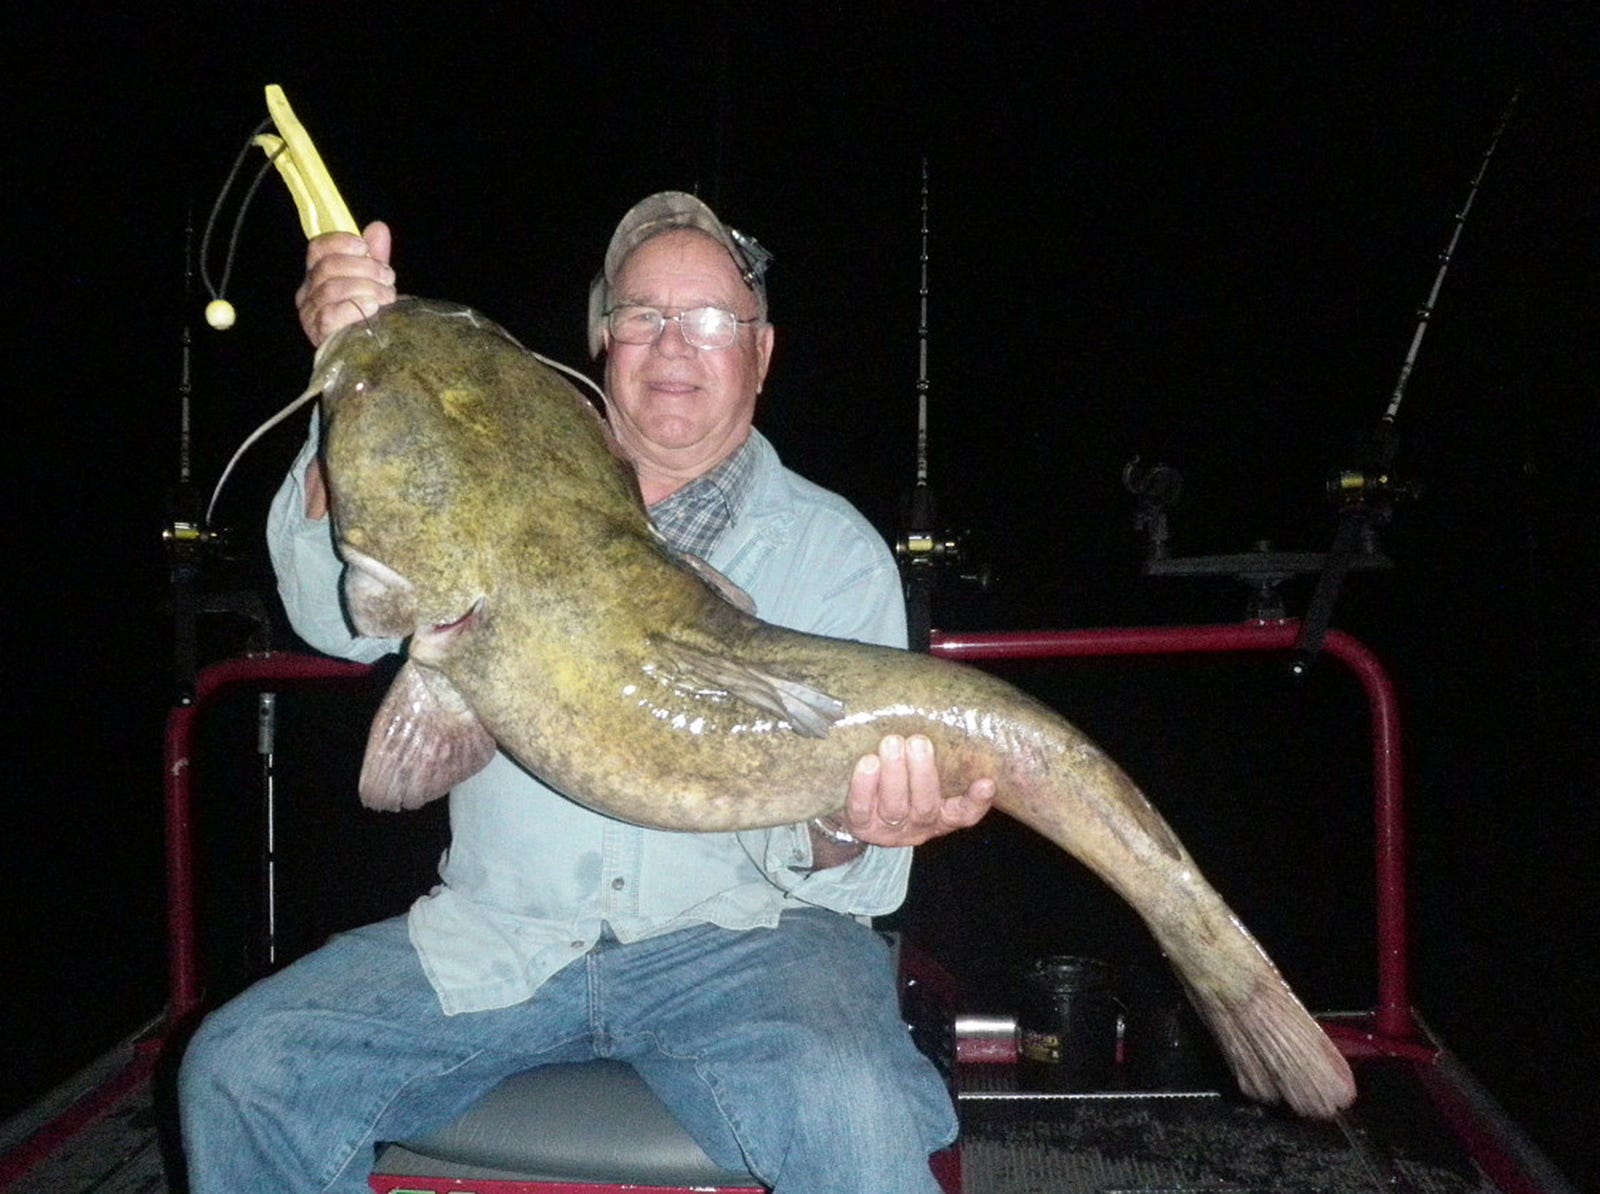 Fish Of The Week: Big Surprise Of A Flathead Catfish While Fishing For  Smallmouth Bass On The Kankakee River Chicago Sun-Times